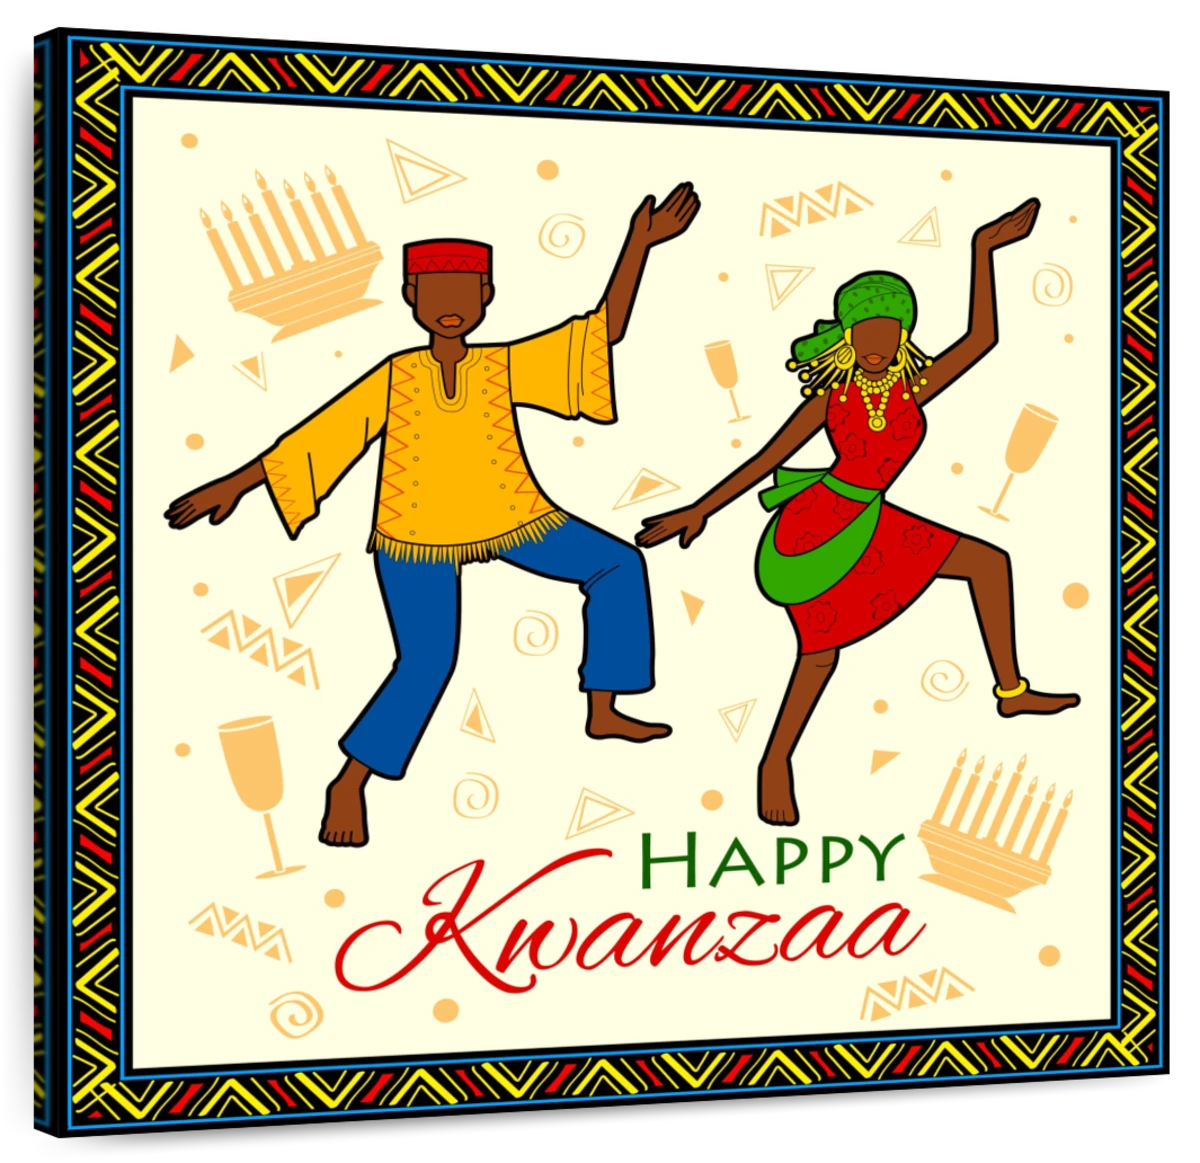  Ambesonne Ethnic Tapestry, Happy Kwanzaa Calligraphic  Illustration Holiday Celebration Cartoon Art Print, Wide Wall Hanging for  Bedroom Living Room Dorm, 60 X 40, Multicolor : Home & Kitchen